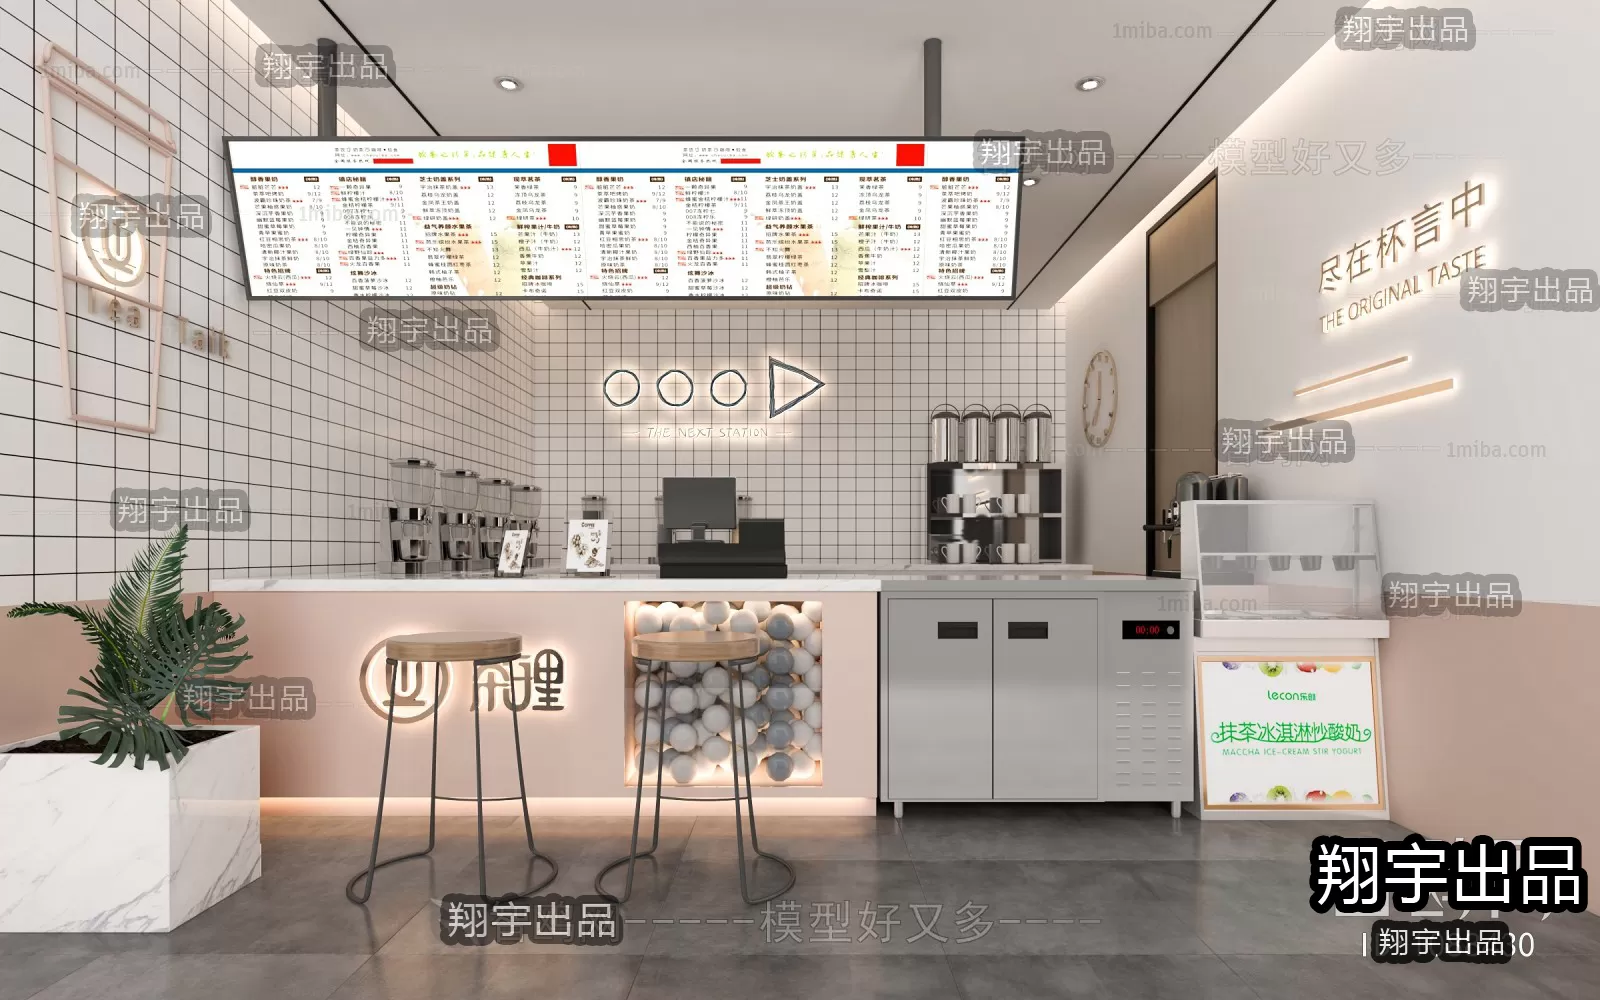 FASTFOOD STORE – 3D SCENES – 0216